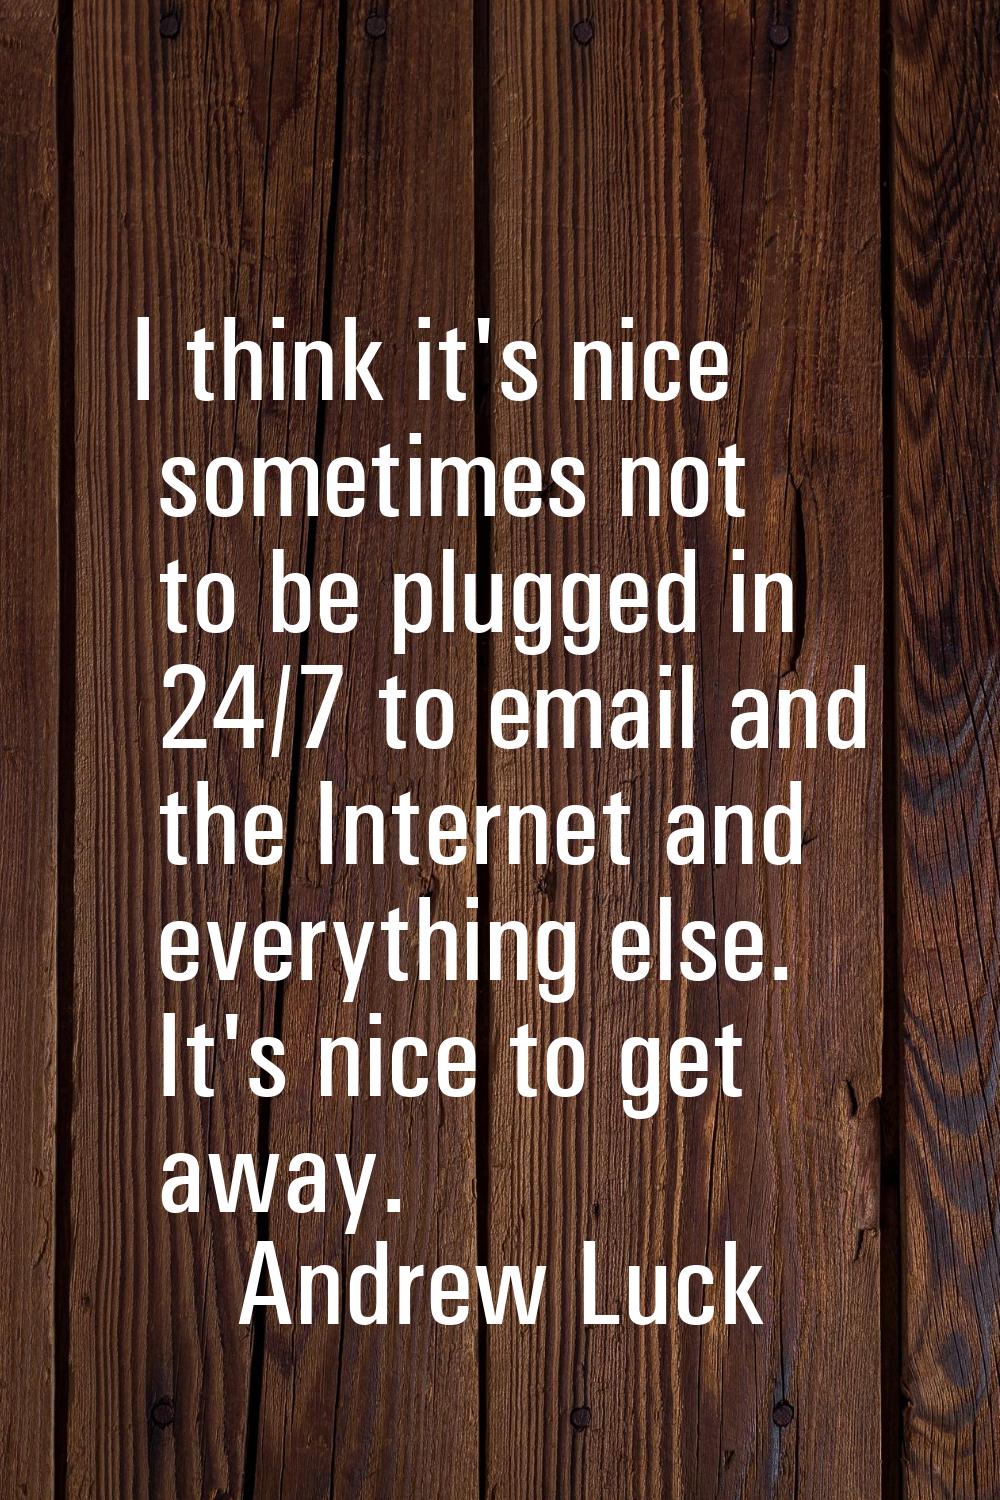 I think it's nice sometimes not to be plugged in 24/7 to email and the Internet and everything else